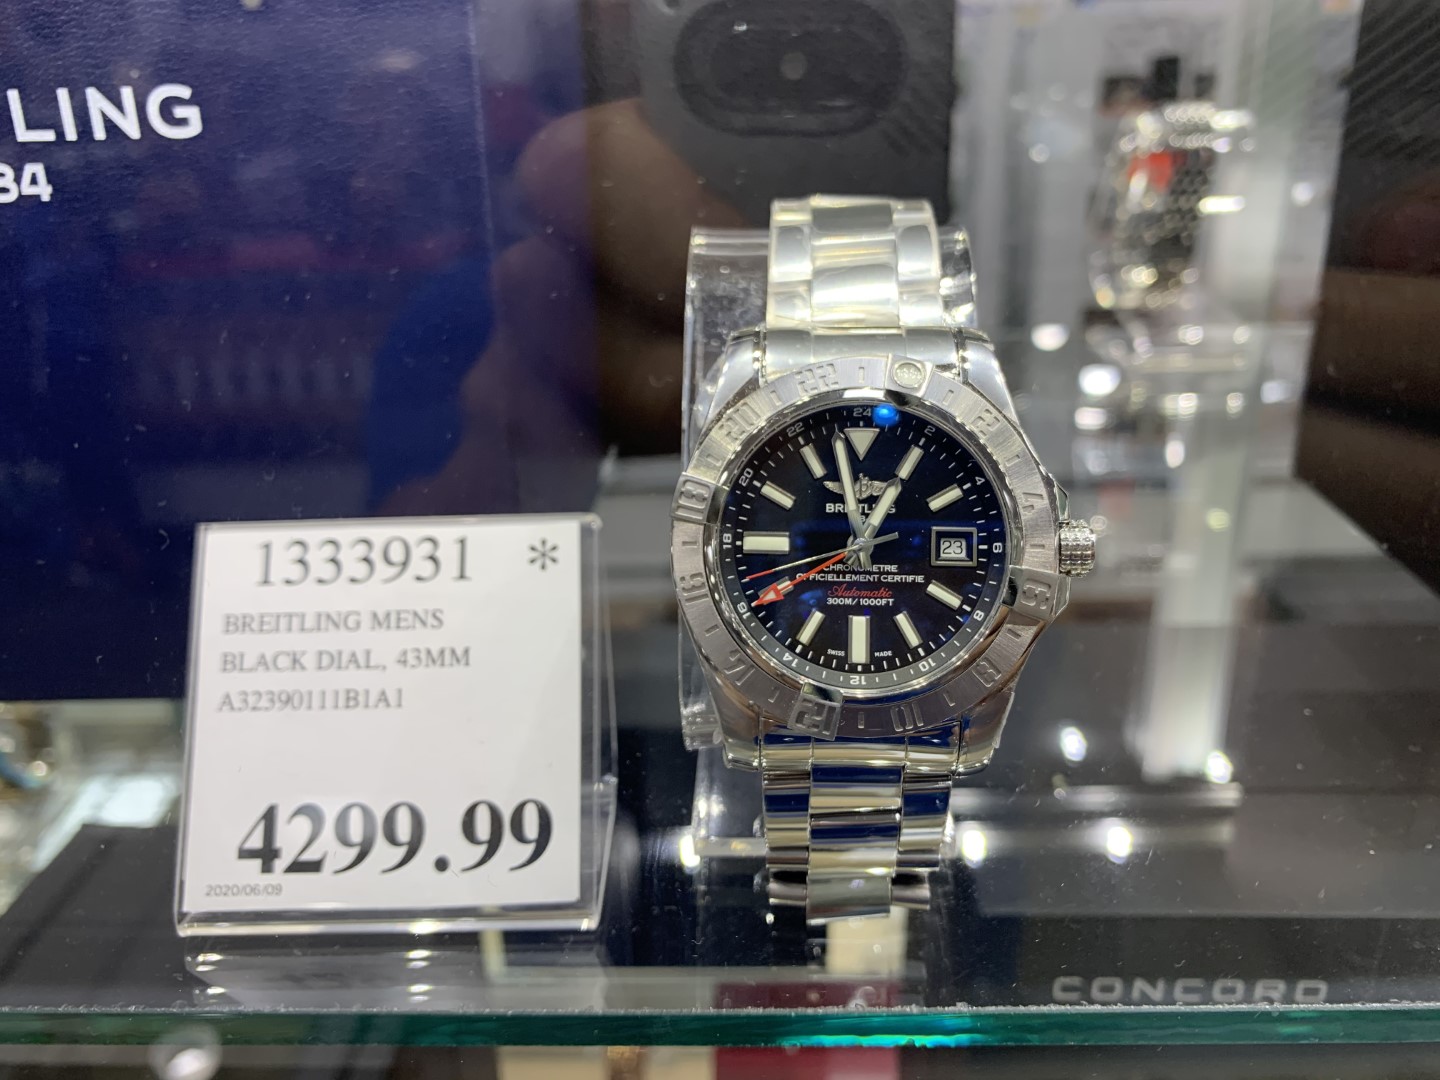 Costco Summer Aisle 2020 Superpost! Watches & Jewelry - Costco West Fan Blog